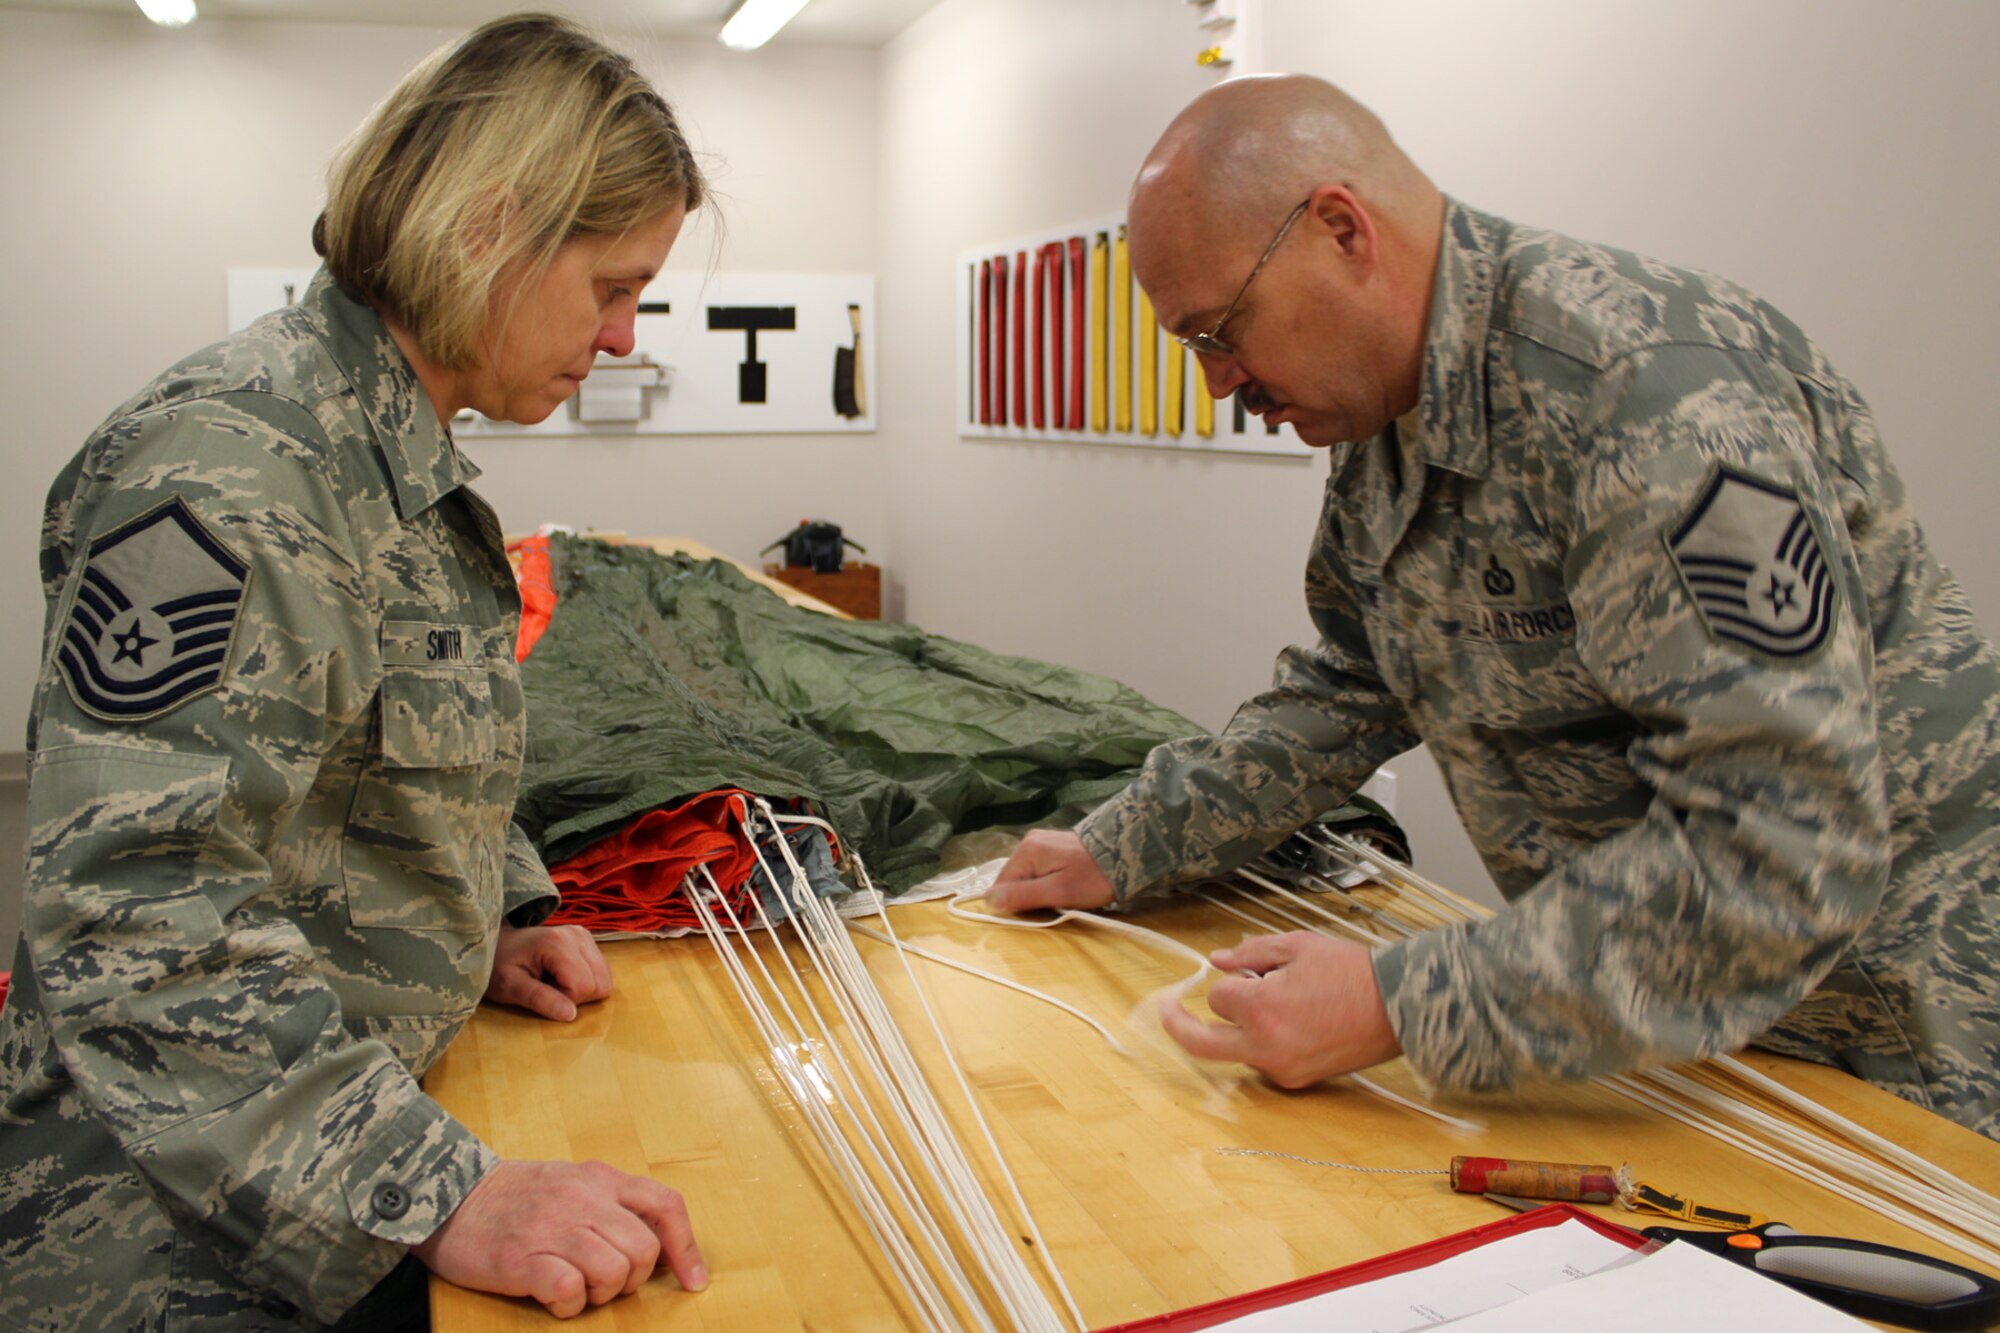 130319-Z-VA676-026 - Master Sgt. Kathy Smith watches as Master Sgt. Ed Stone makes a repair to a piece of parachute cord during an inspection of an ACES II C-9 canopy parachute at Selfridge Air National Guard Base, Mich., March 19, 2013. Air Force parachutes are inspected at least annually and then re-packed. Stone and Smith are members of the aircrew flight equipment shop of the 127th Operations Support Flight, a component of the 127th Wing, Michigan Air National Guard. (Air National Guard photo by TSgt. Dan Heaton)